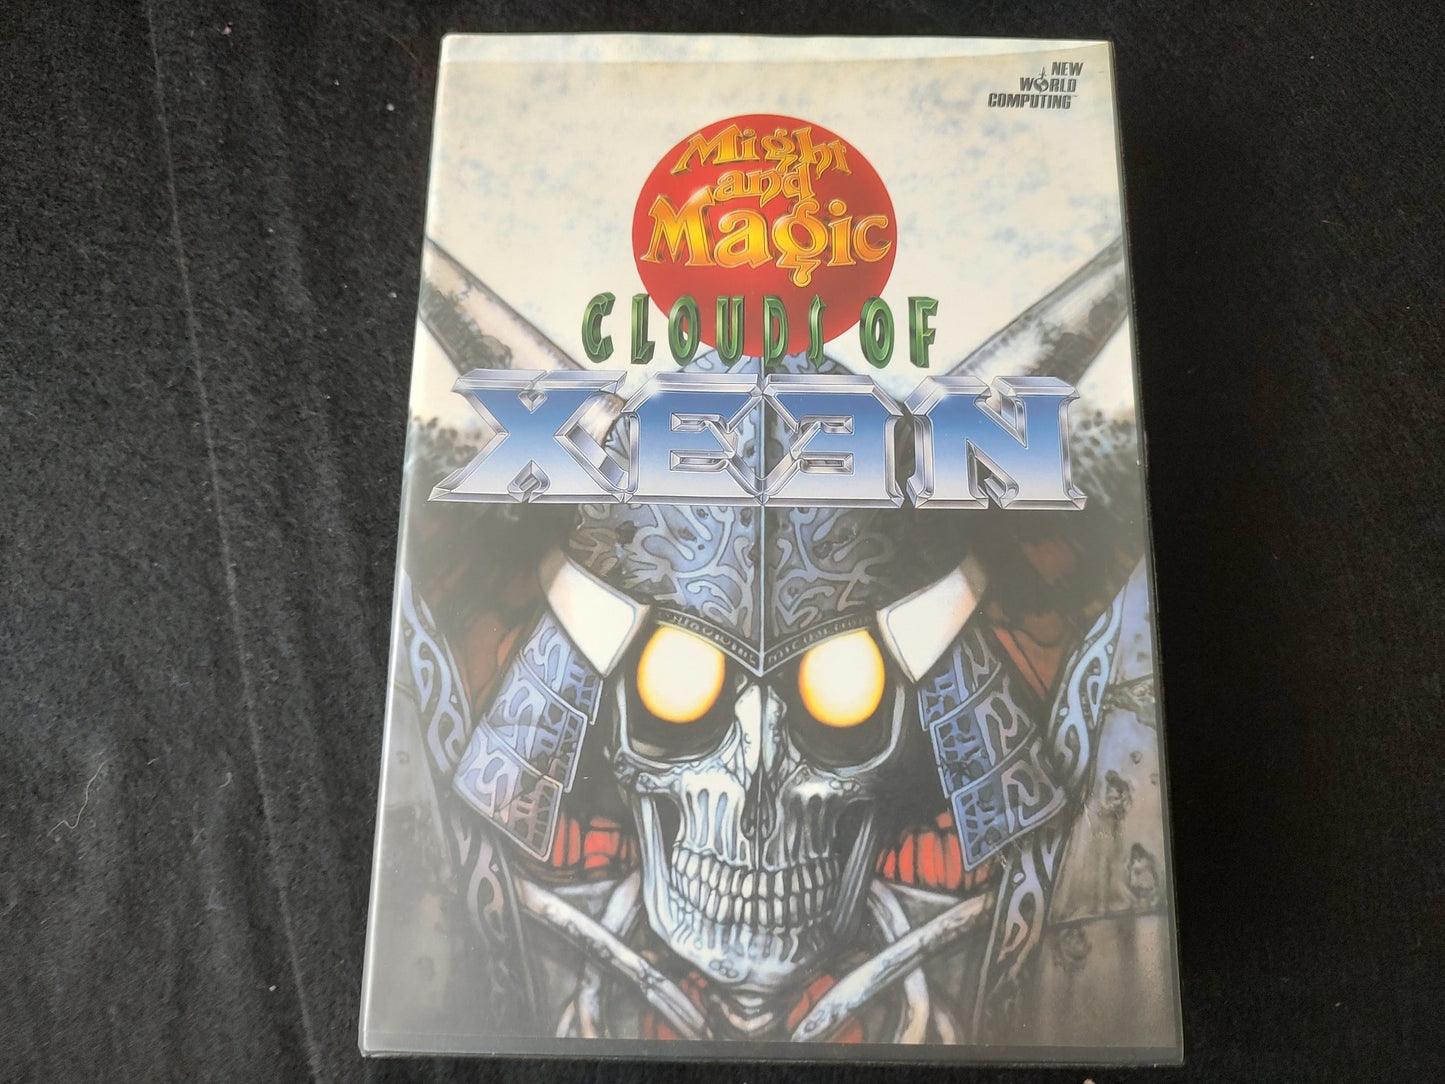 PC-9801 PC98 Might And Magic Clouds of XEEN, w/Manual, Box set,Not tested-f0629-